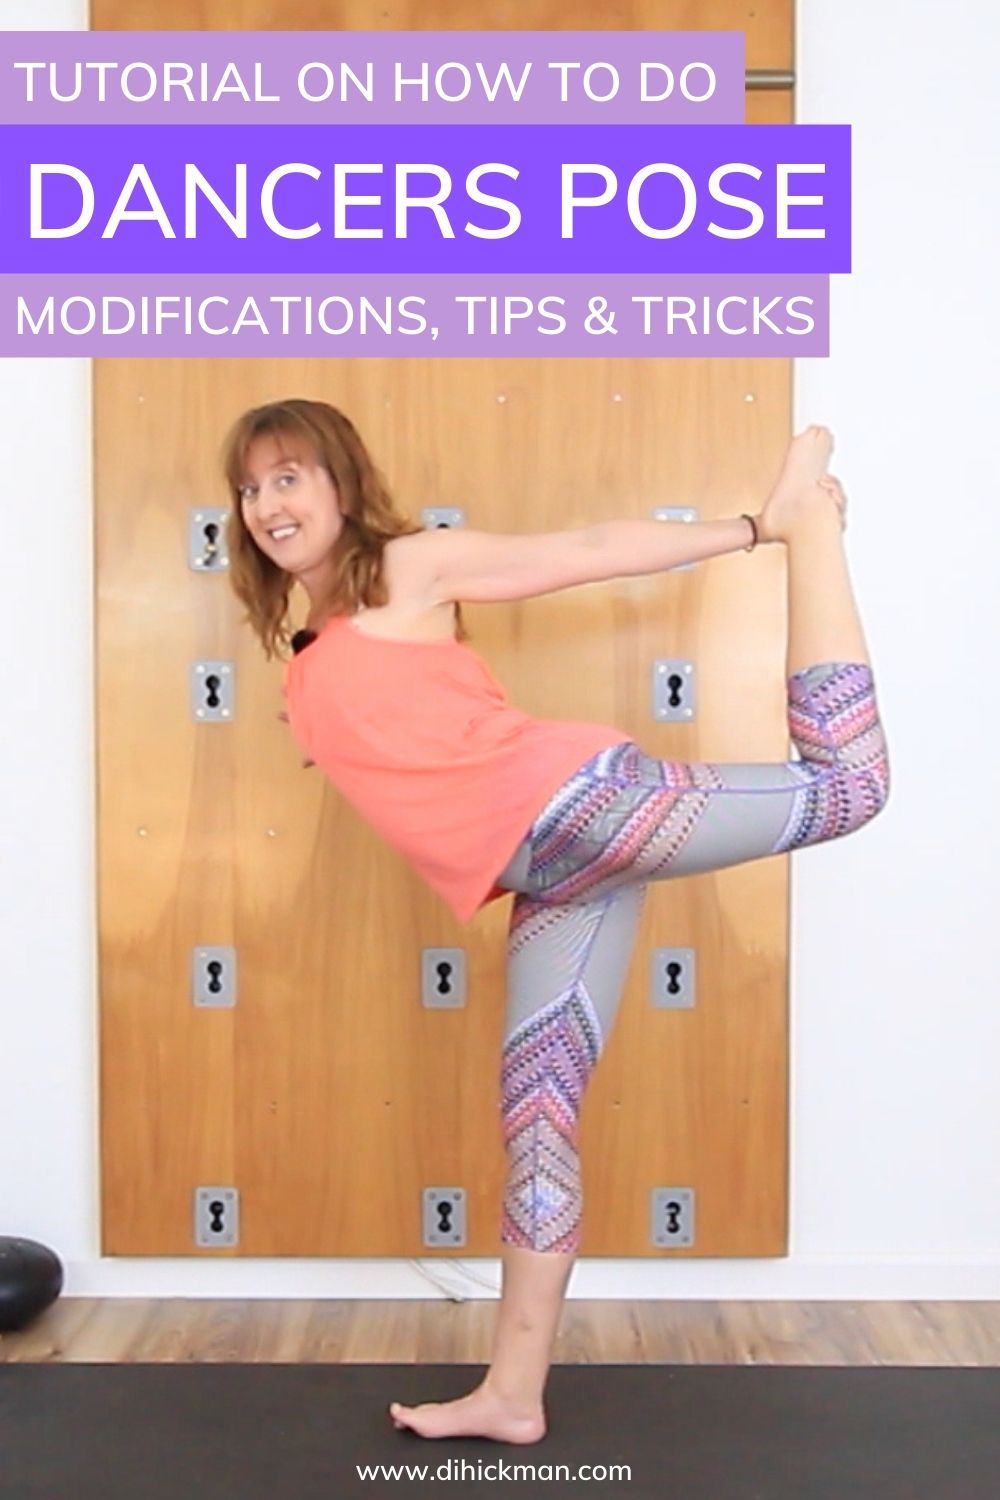 tutorial on how to do dancers pose. Modifications, tips & tricks